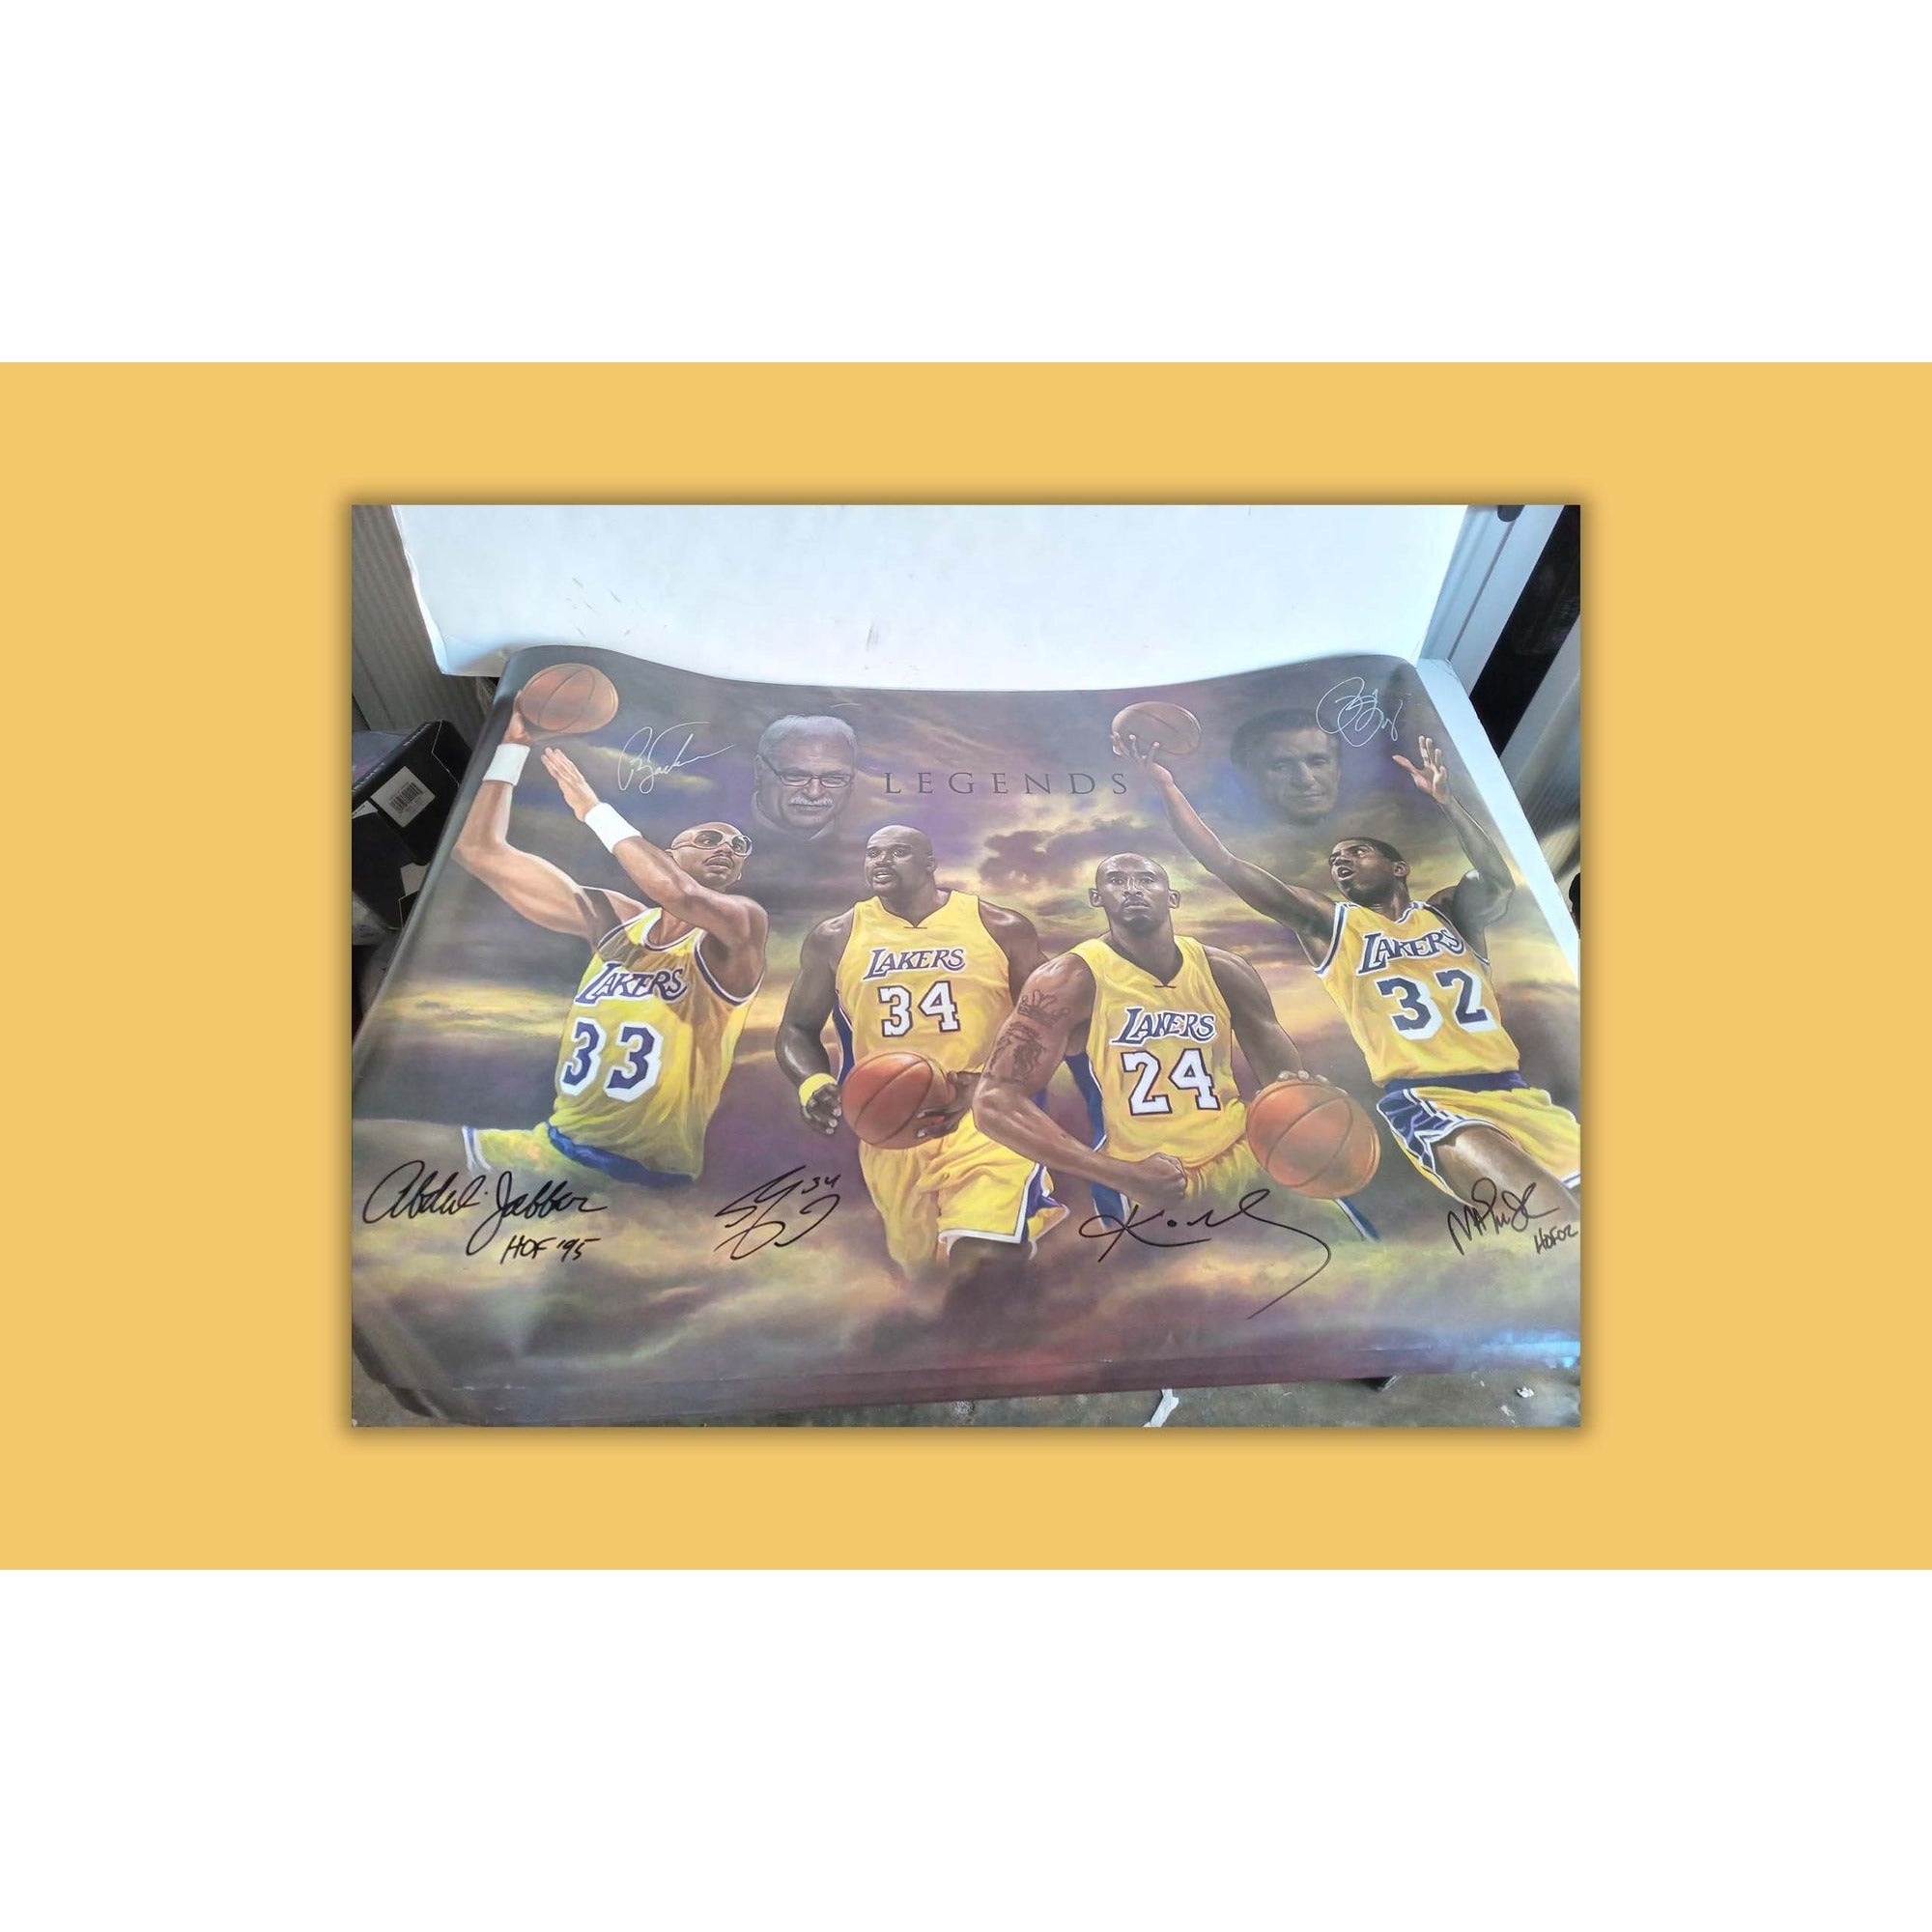 LA Lakers Lithograph print of Magic Johnson "Out of this world"  11 x 17